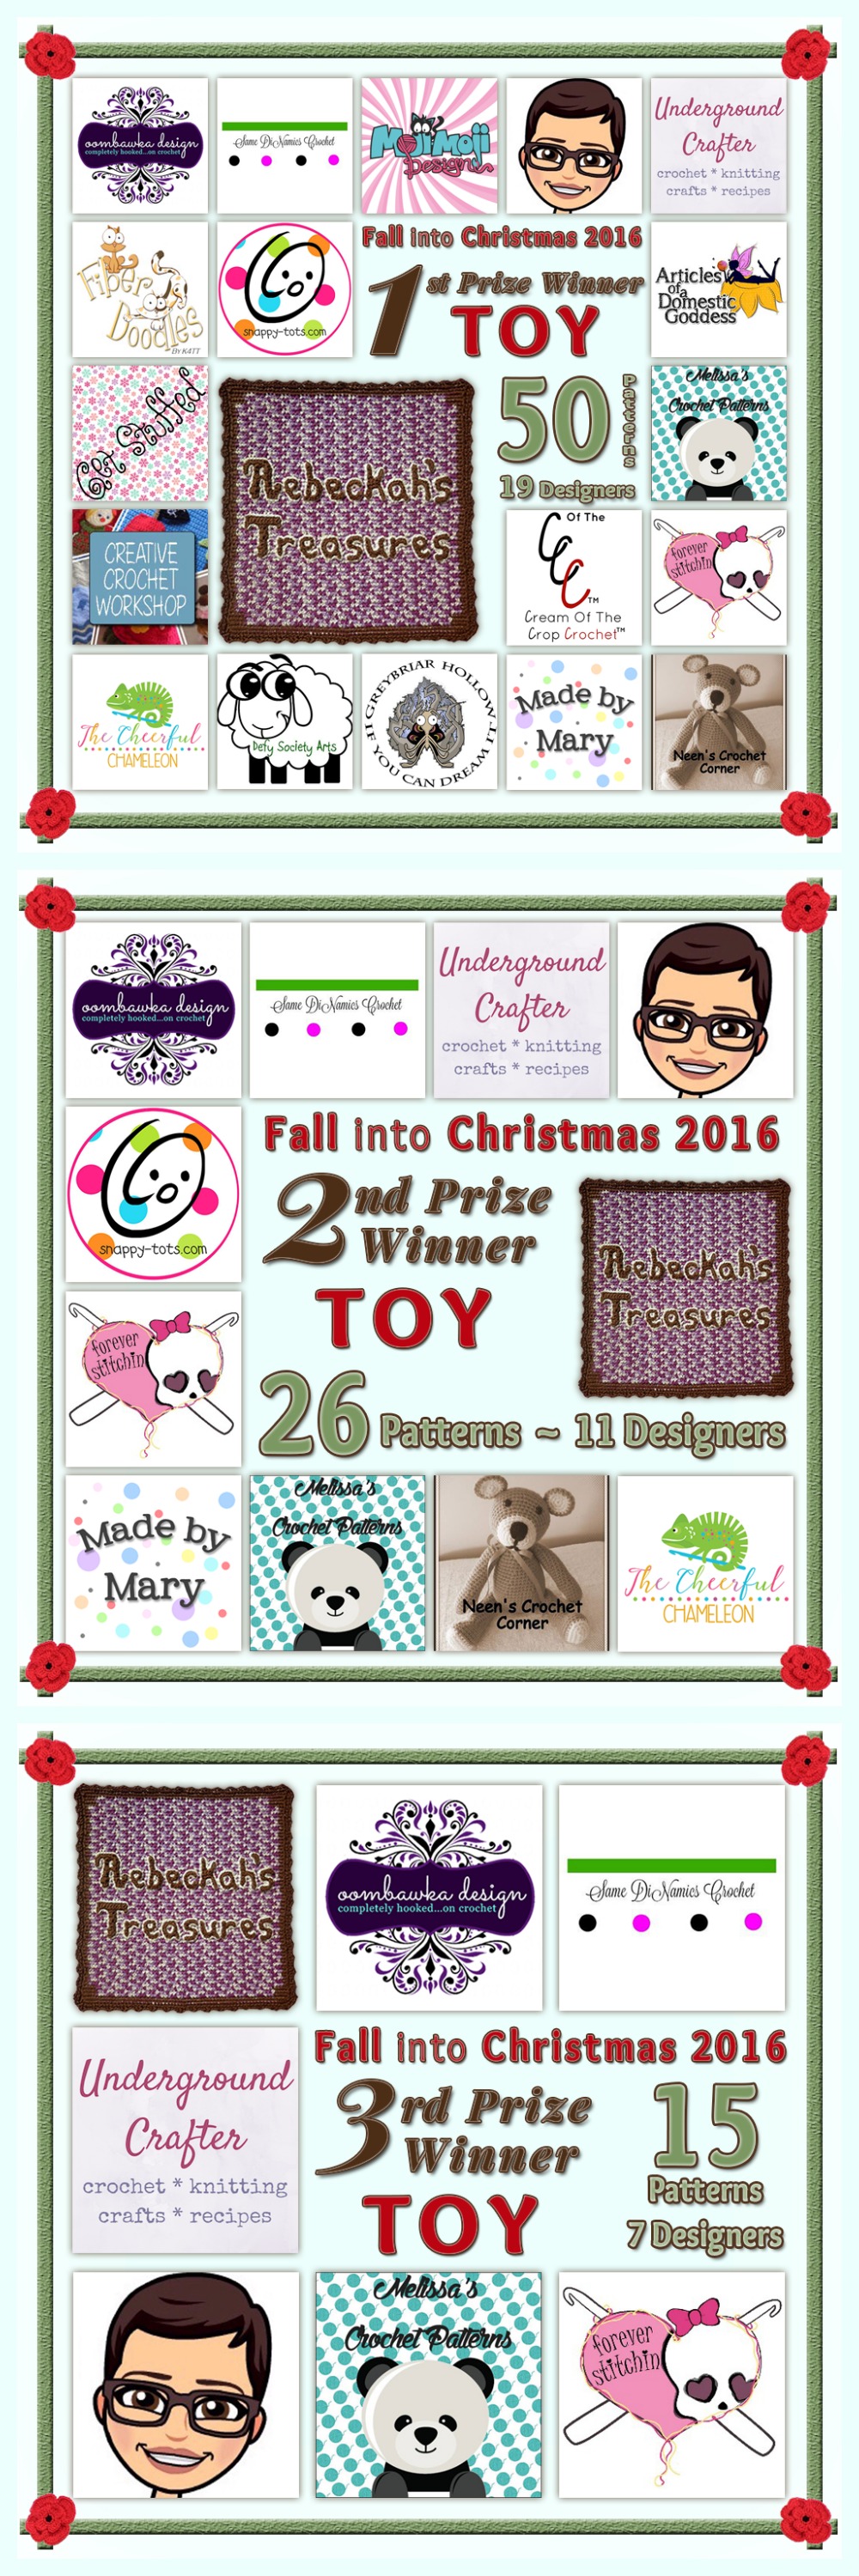 VOTE TOY in the Fall into Christmas 2016 crochet contest via @beckastreasures! | Help your favourites win these awesome prizes. | Up to 5 votes daily! Vote here: https://goo.gl/8Lwng5 #fallintochristmas2016